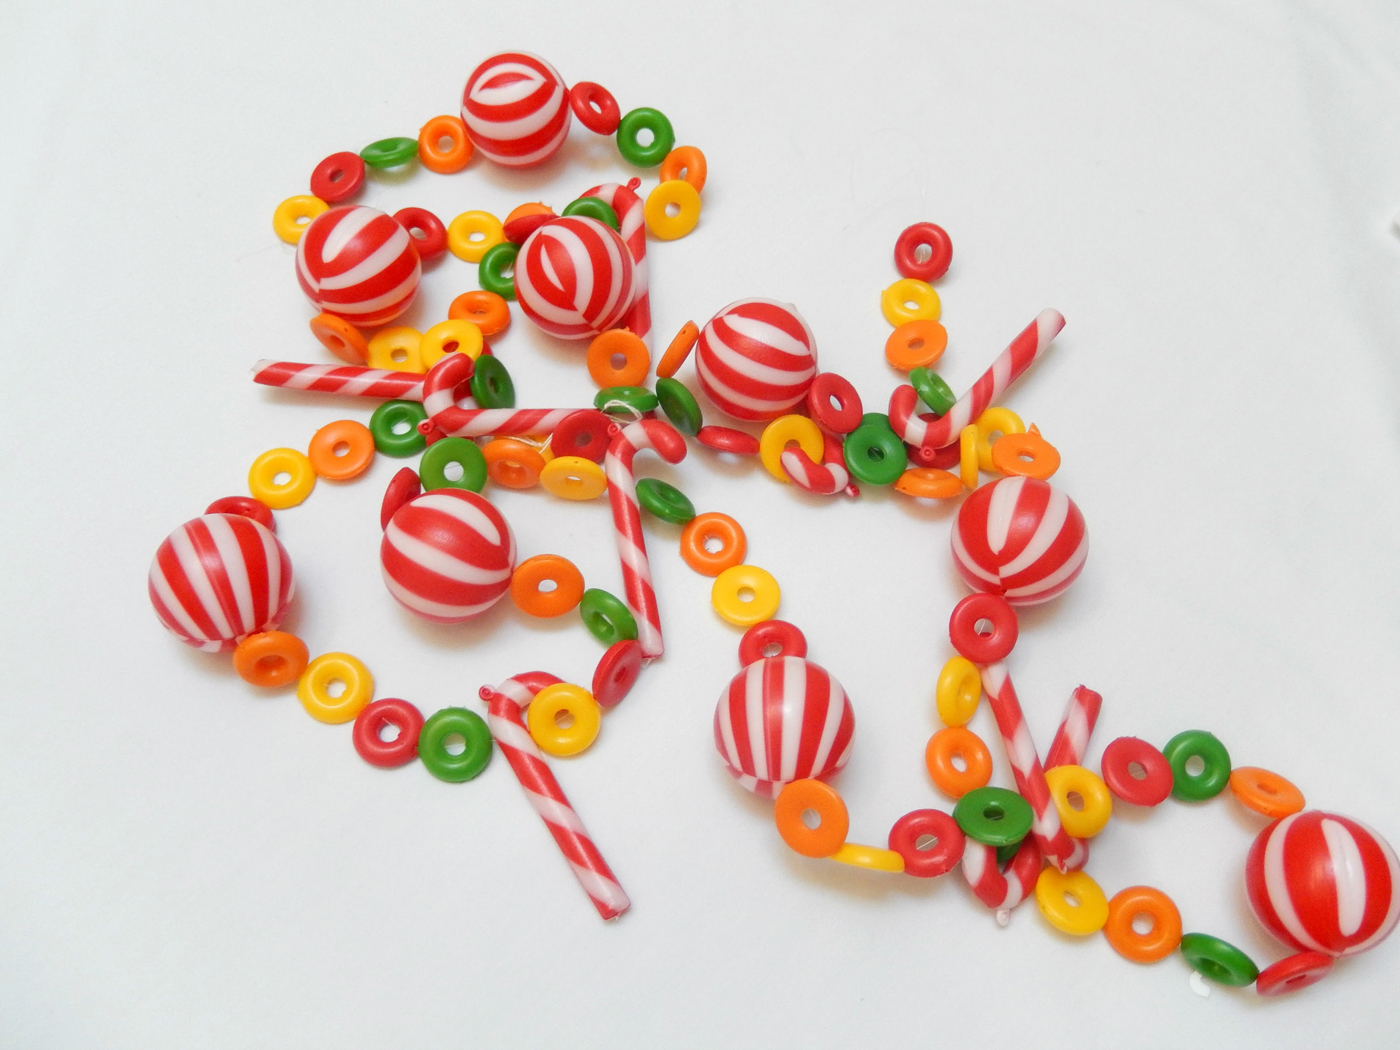 Garland Christmas Decorations For Indoor Use 9 Foot Plastic Candy Bead Peppermint Ball Christmas Garland Shinny Colorful Christmas Tree Garland Perfect For Retro Candy Land Theme Trees 